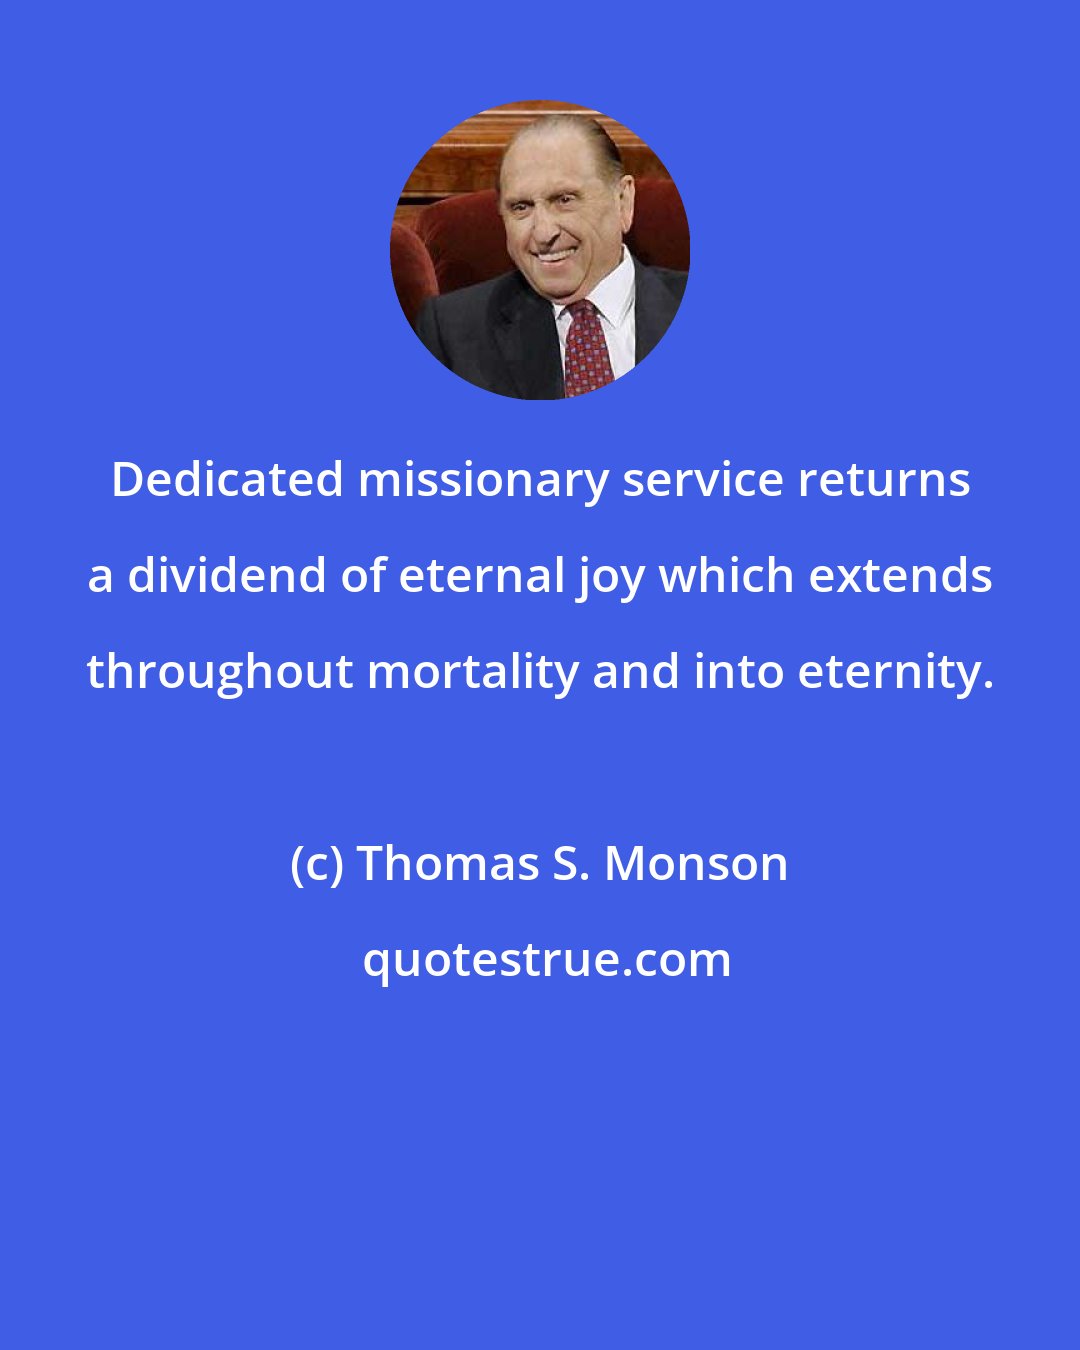 Thomas S. Monson: Dedicated missionary service returns a dividend of eternal joy which extends throughout mortality and into eternity.